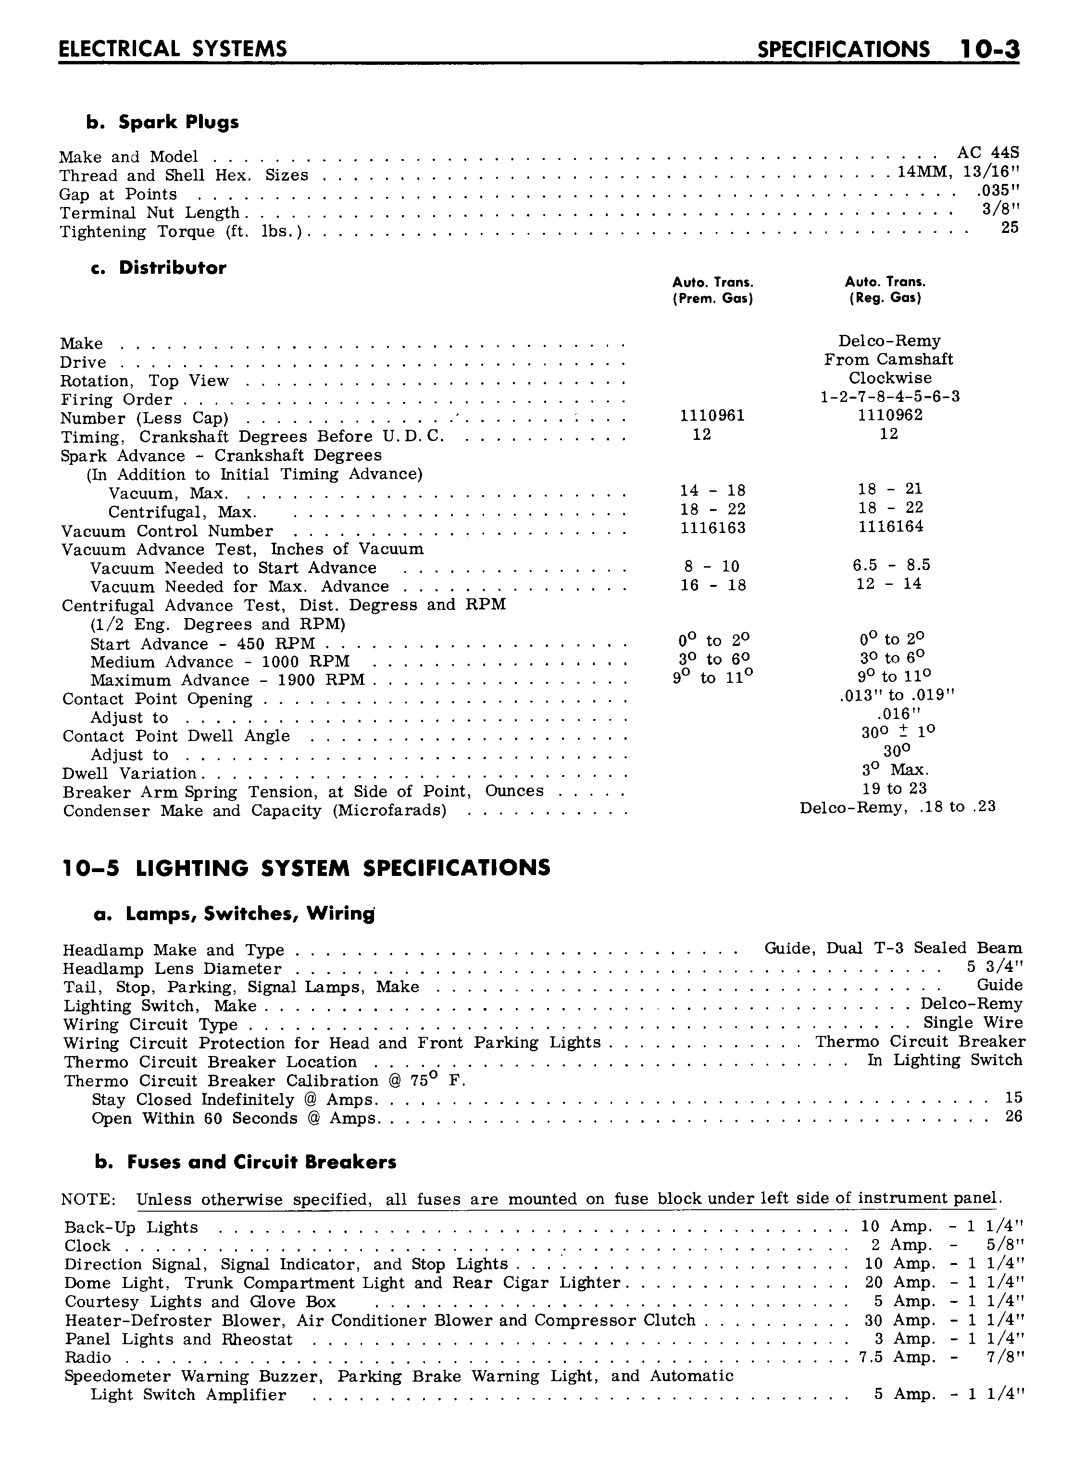 n_10 1961 Buick Shop Manual - Electrical Systems-003-003.jpg